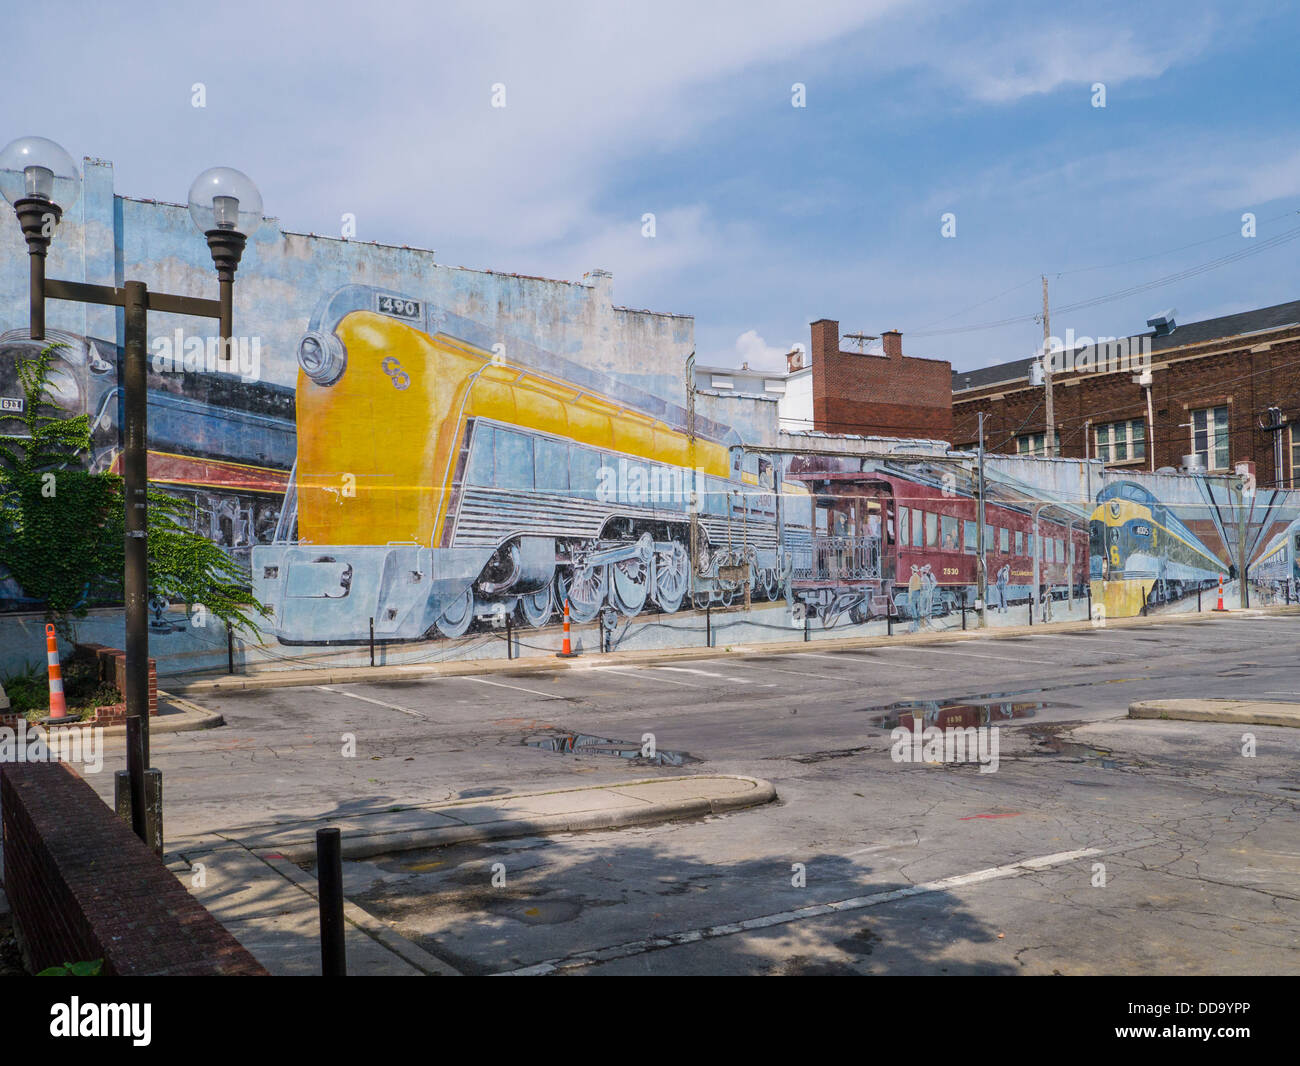 Train mural painted on building in Short North area of Columbus Ohio United States Stock Photo